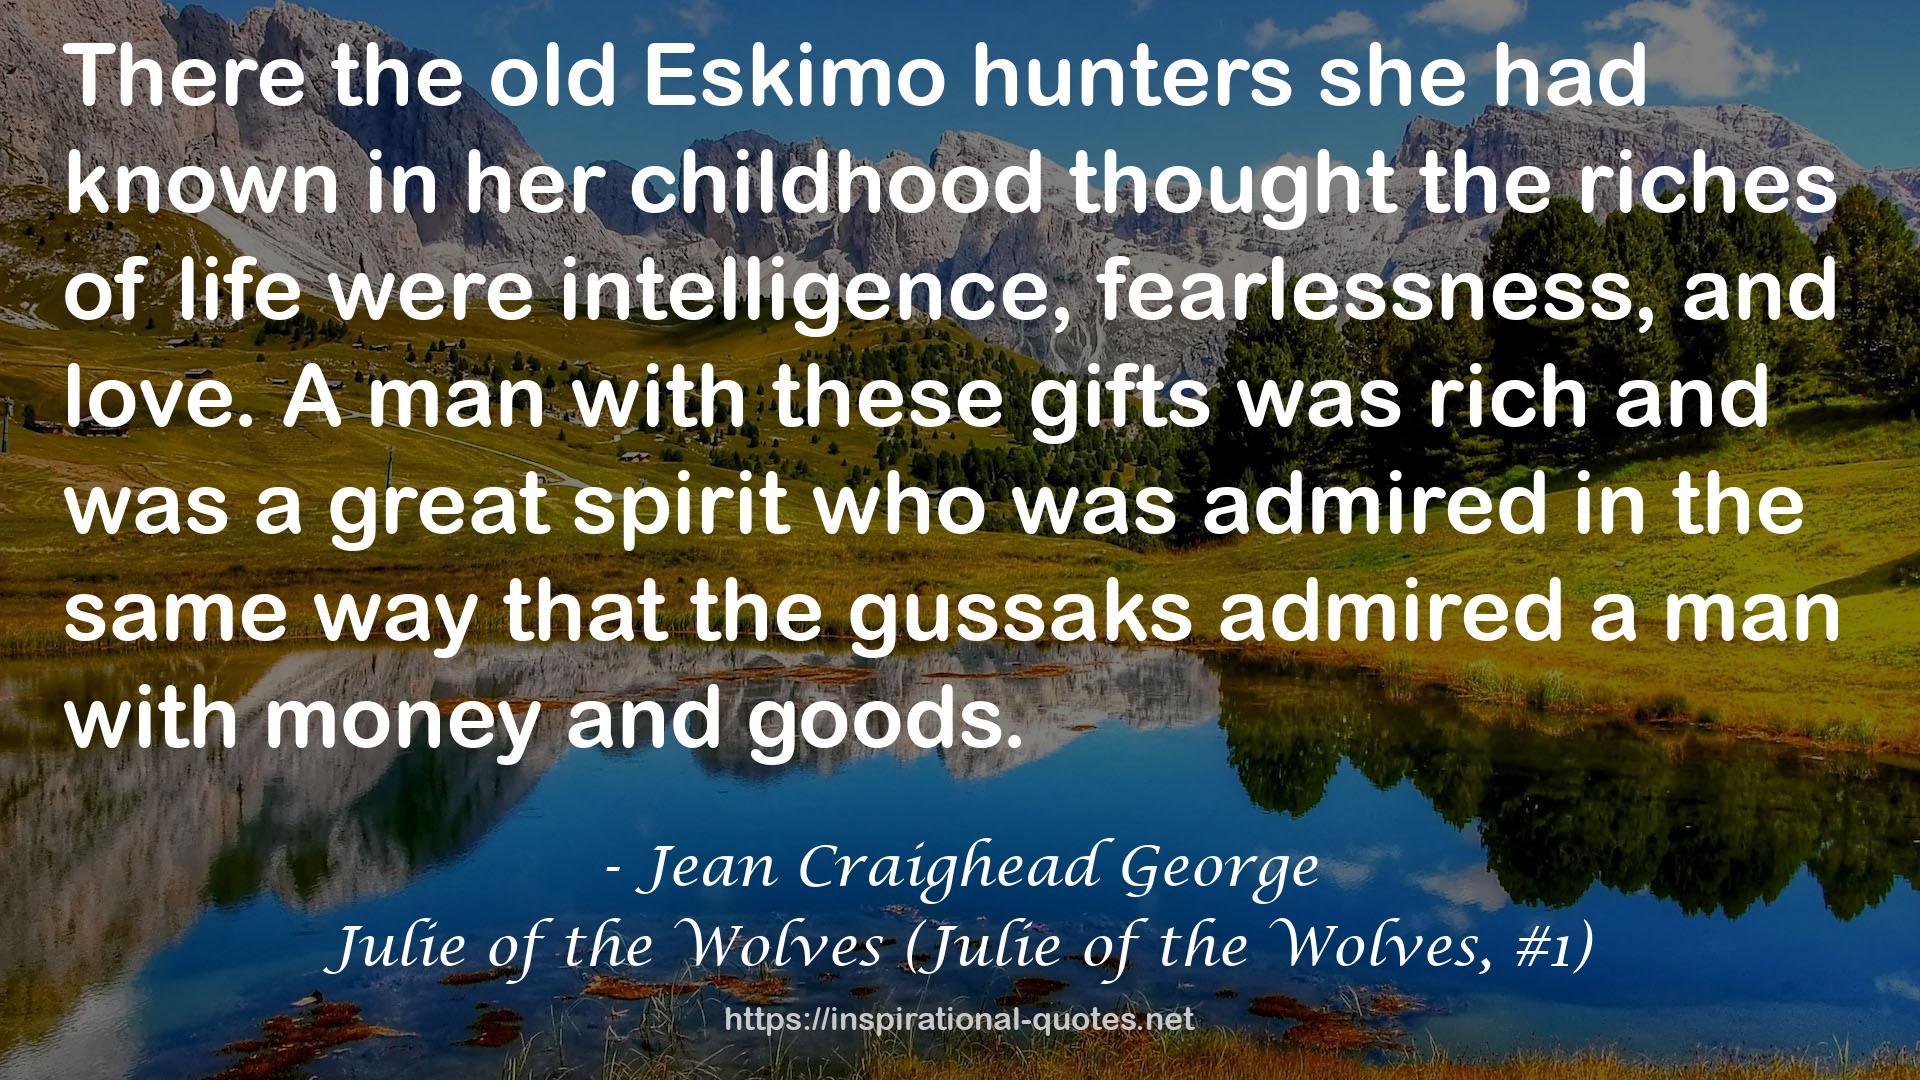 Julie of the Wolves (Julie of the Wolves, #1) QUOTES